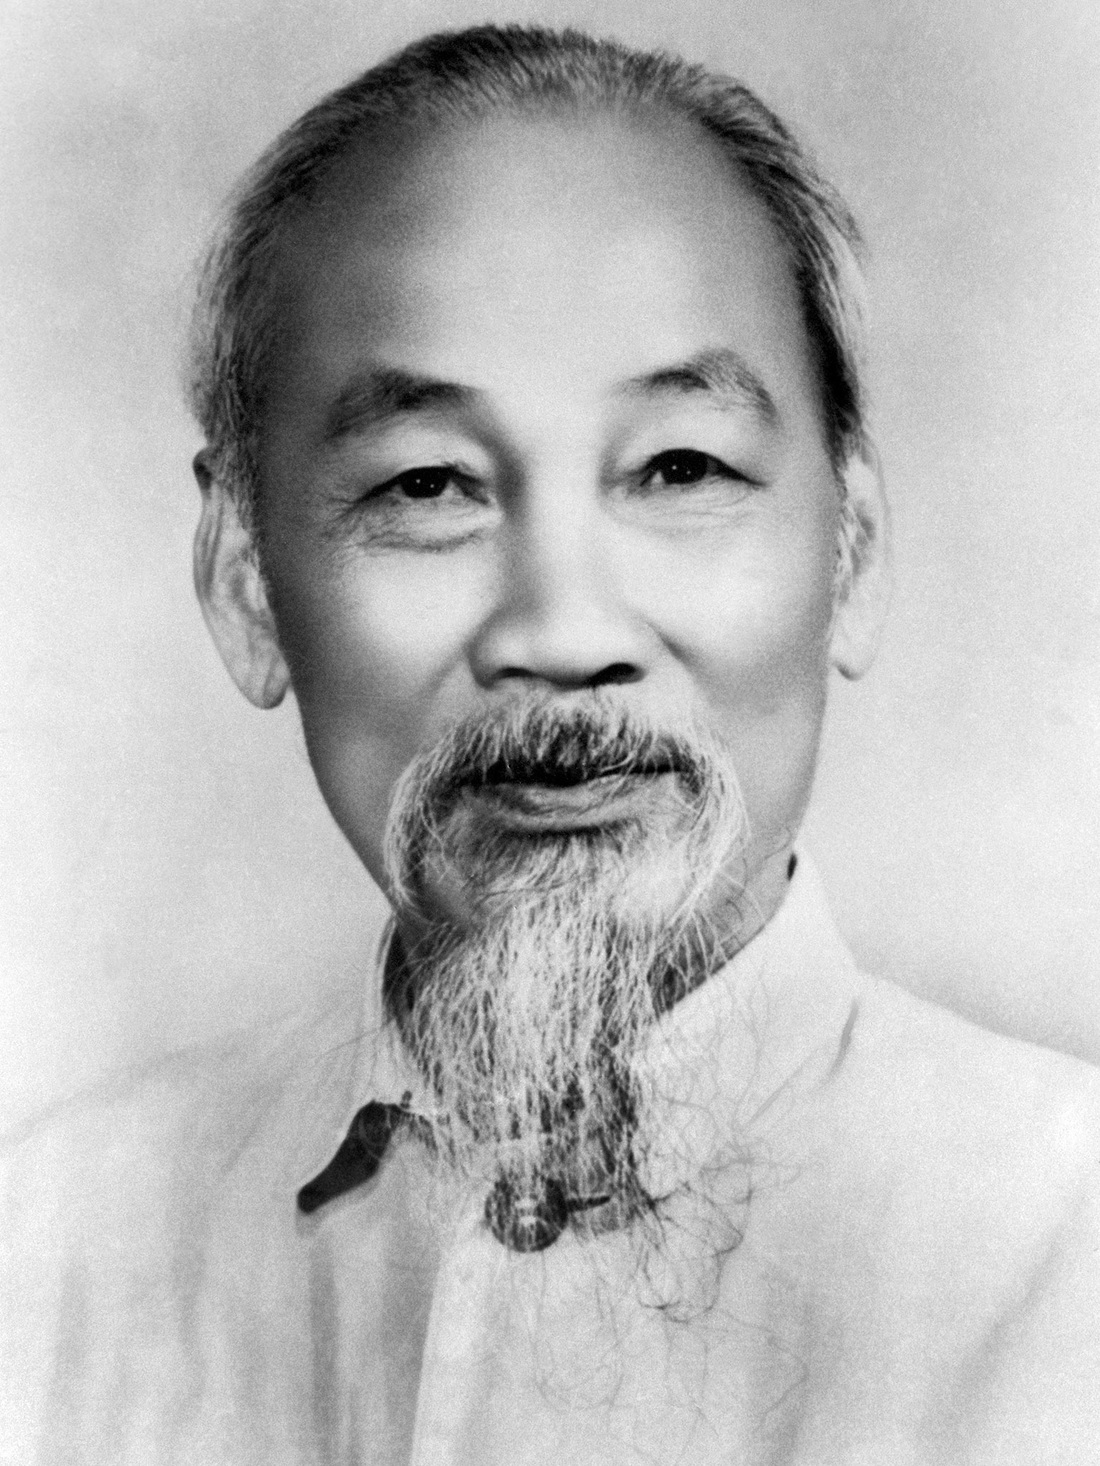 Leadership Styles of Ho Chi Minh and